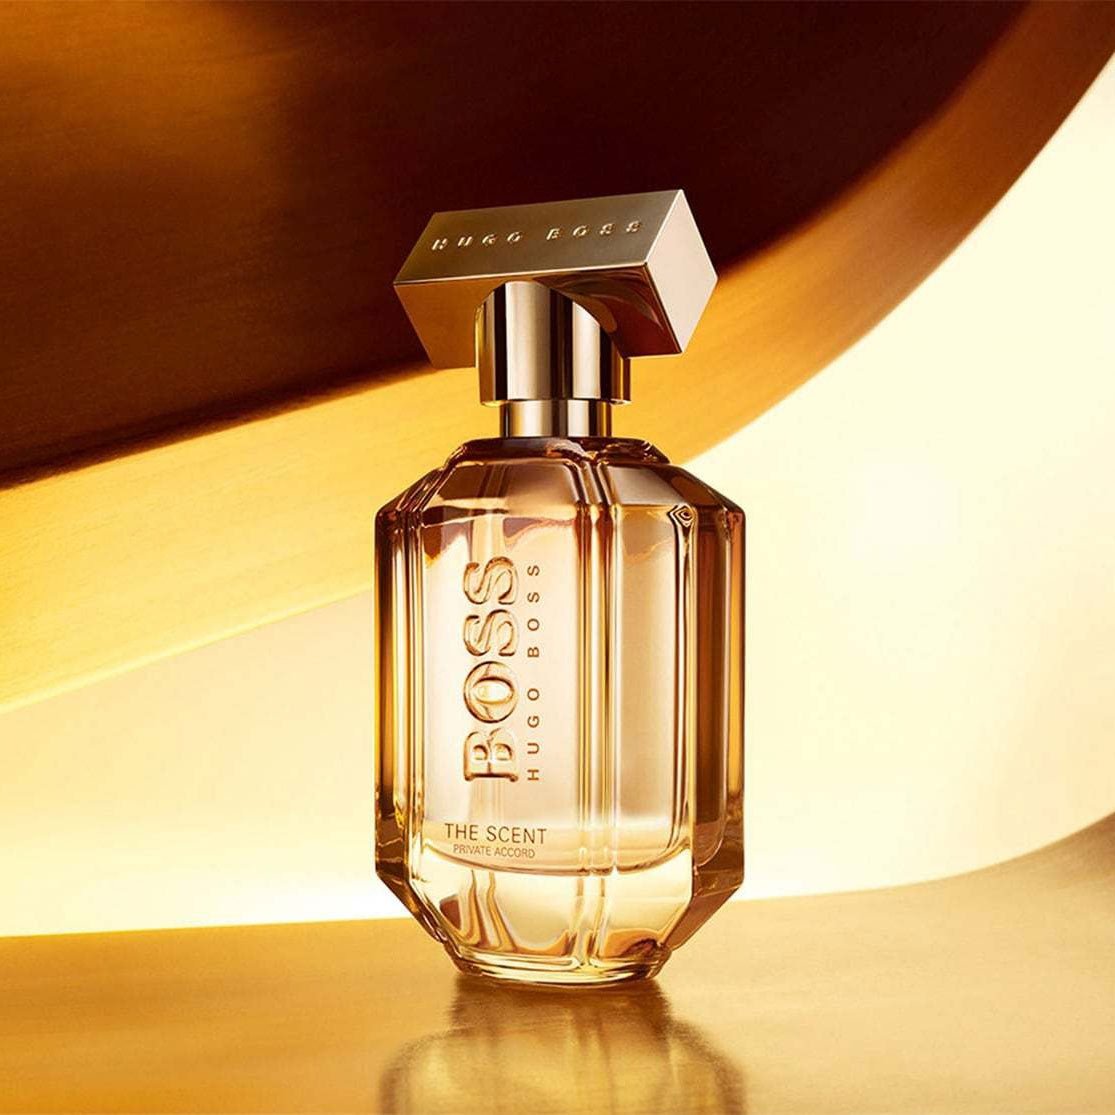 Hugo Boss The Scent Private Accord EDP For Her | My Perfume Shop Australia